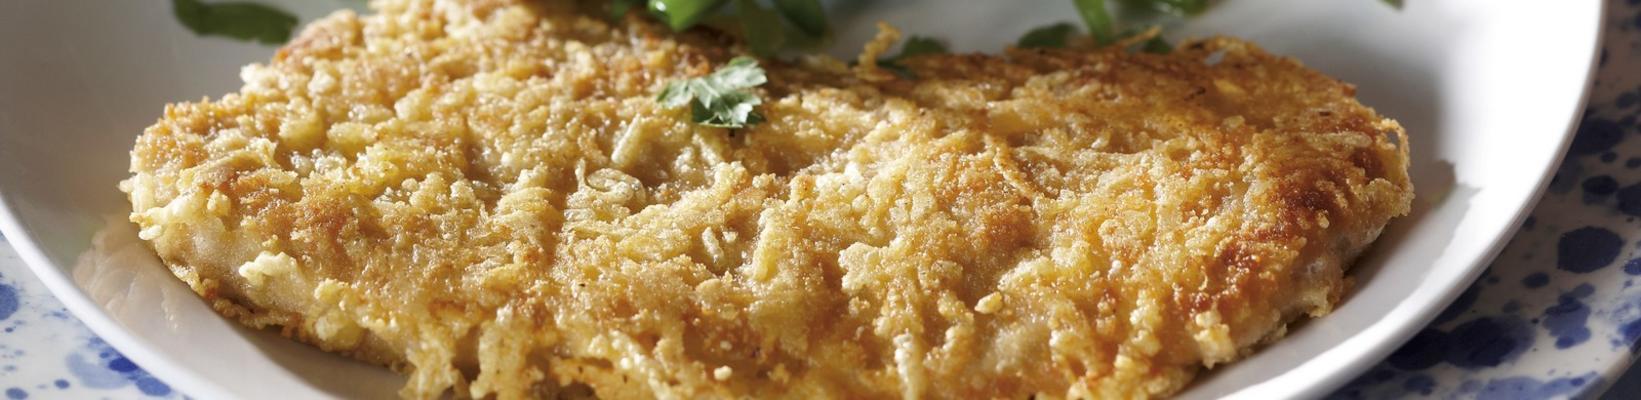 schnitzel with cheese crust